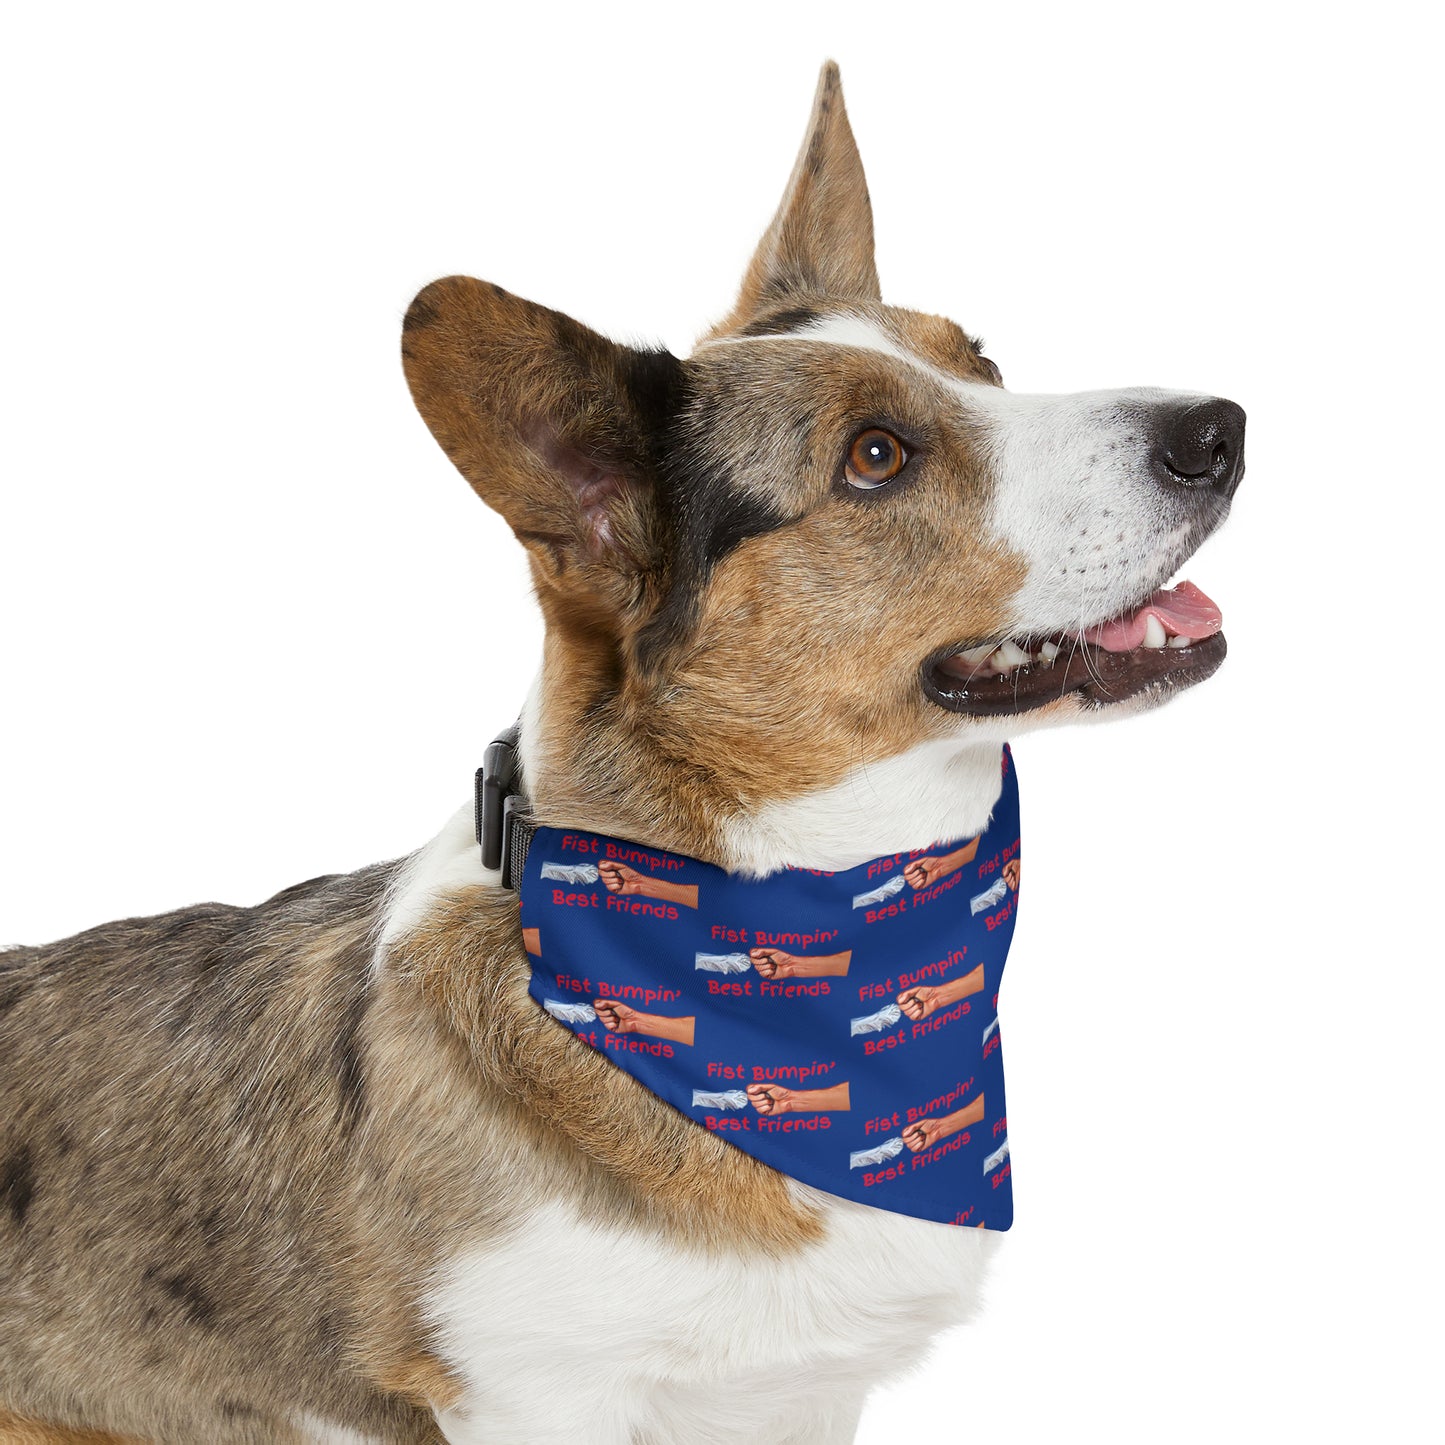 Fist Bumpin’ Best Friends Opie’s Cavalier King Charles Spaniel Paw Pet Bandana Collar Blue with KC Red lettering.